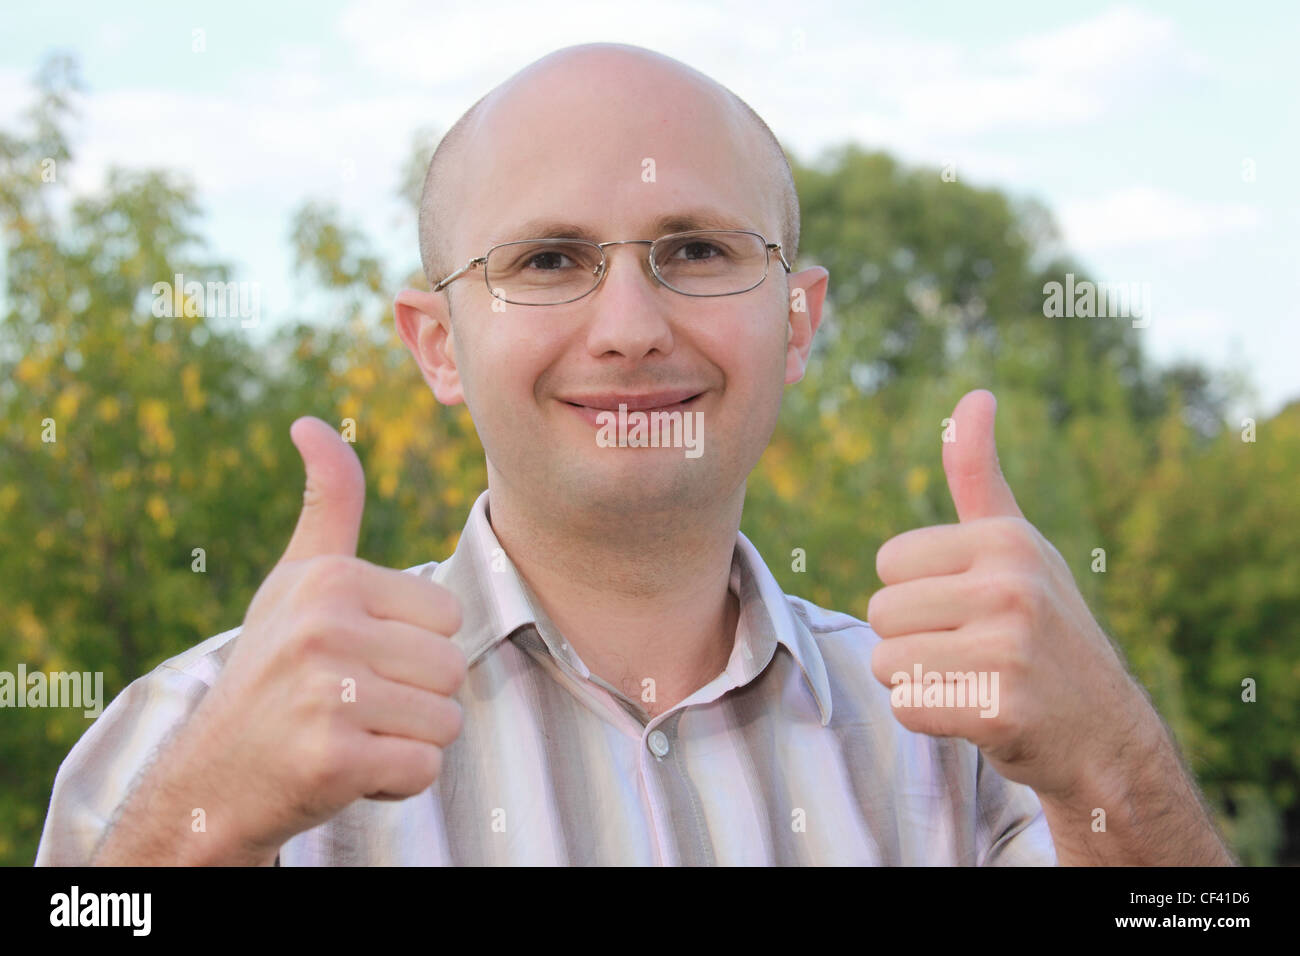 smiling man in early fall park with thumbs up gestures Stock Photo